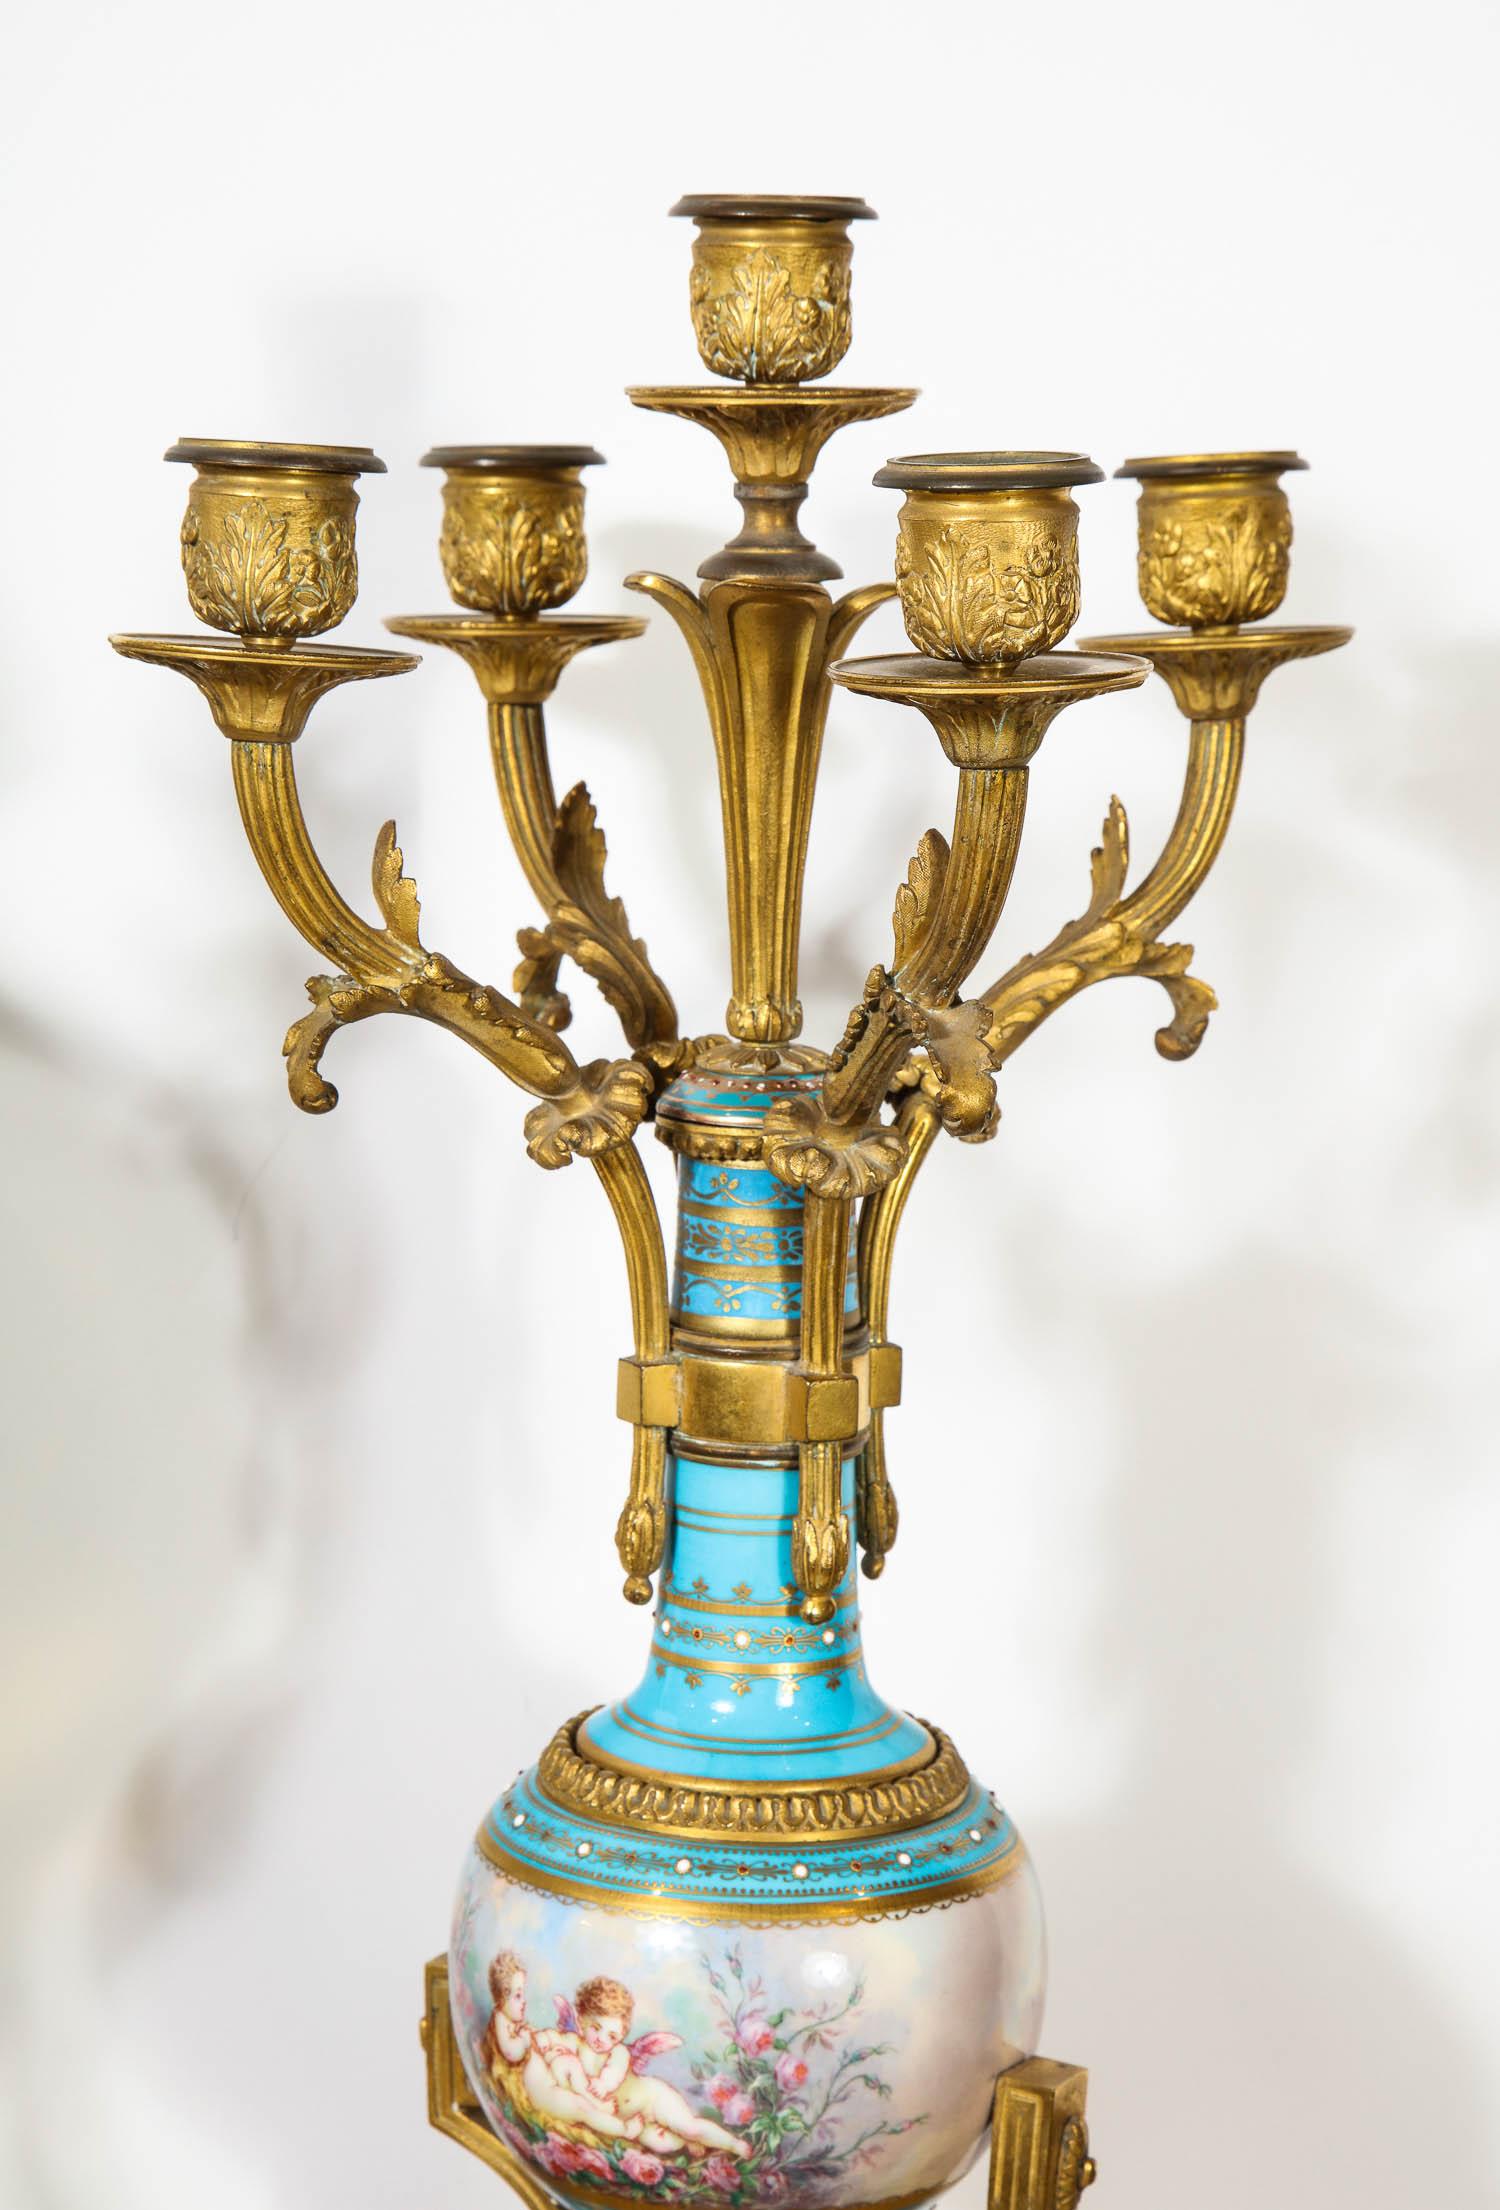 Exceptional French Ormolu-Mounted Turquoise Jeweled Sevres Porcelain Clock Set 4